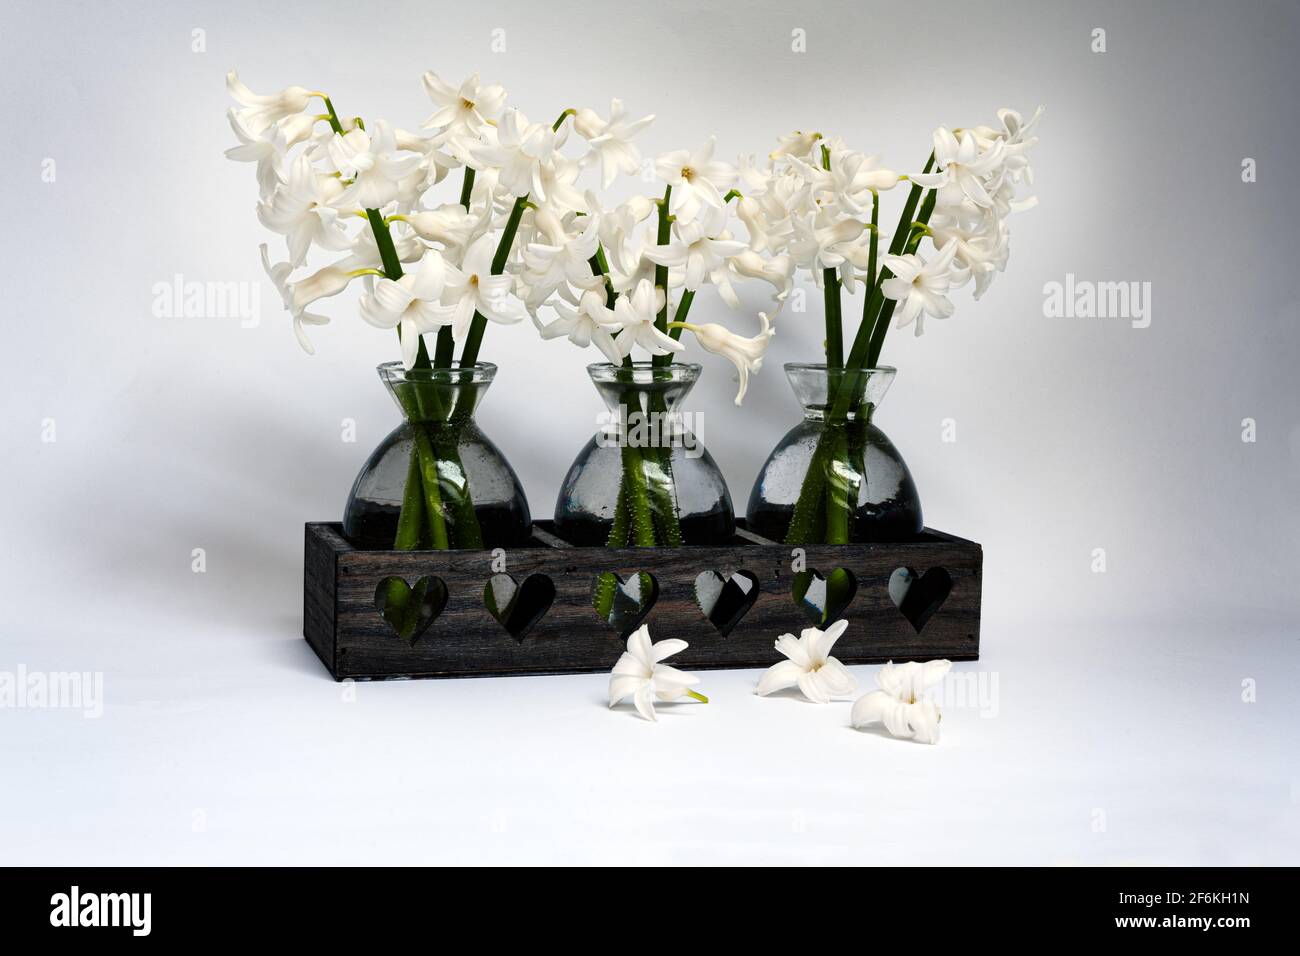 Bouquets of white Hyacinths  in small glass vases on a white background Stock Photo